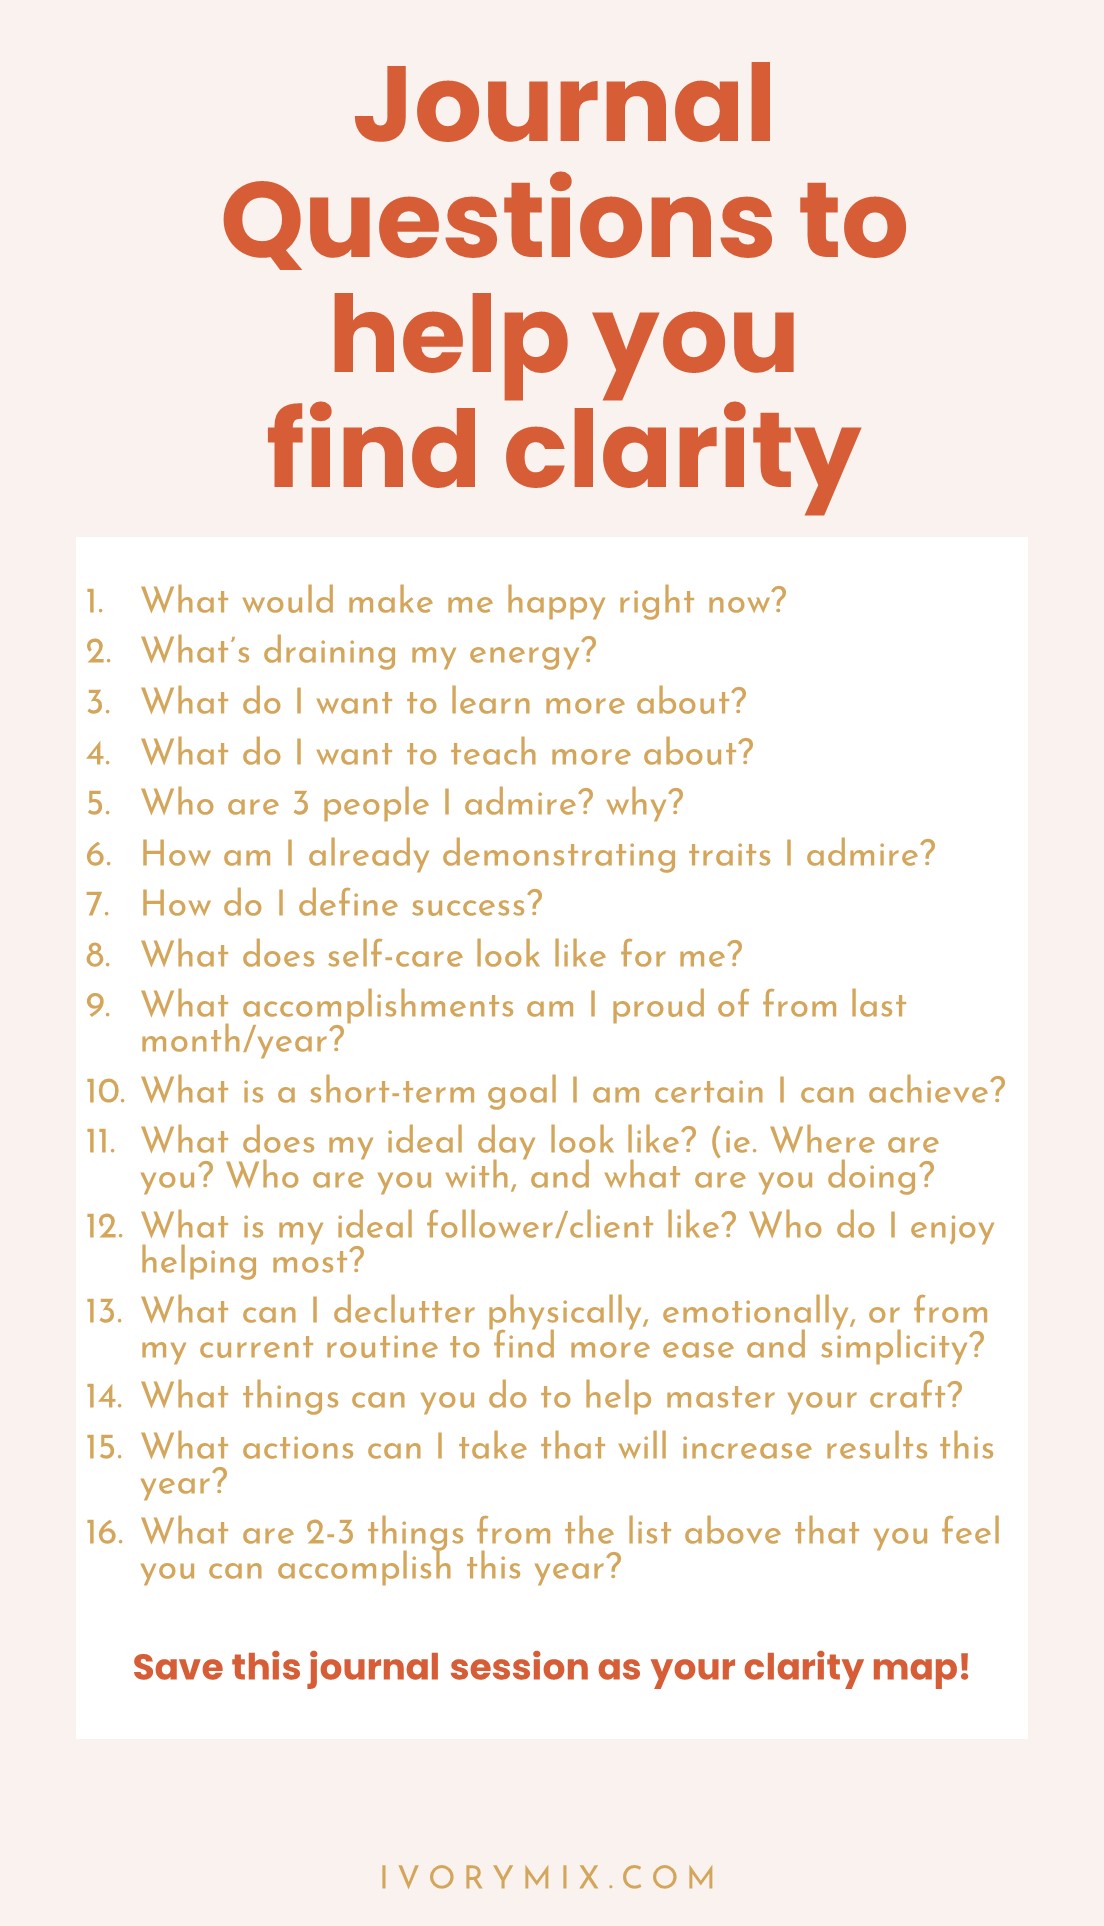 16 Questions to help you find clarity in your life as a content